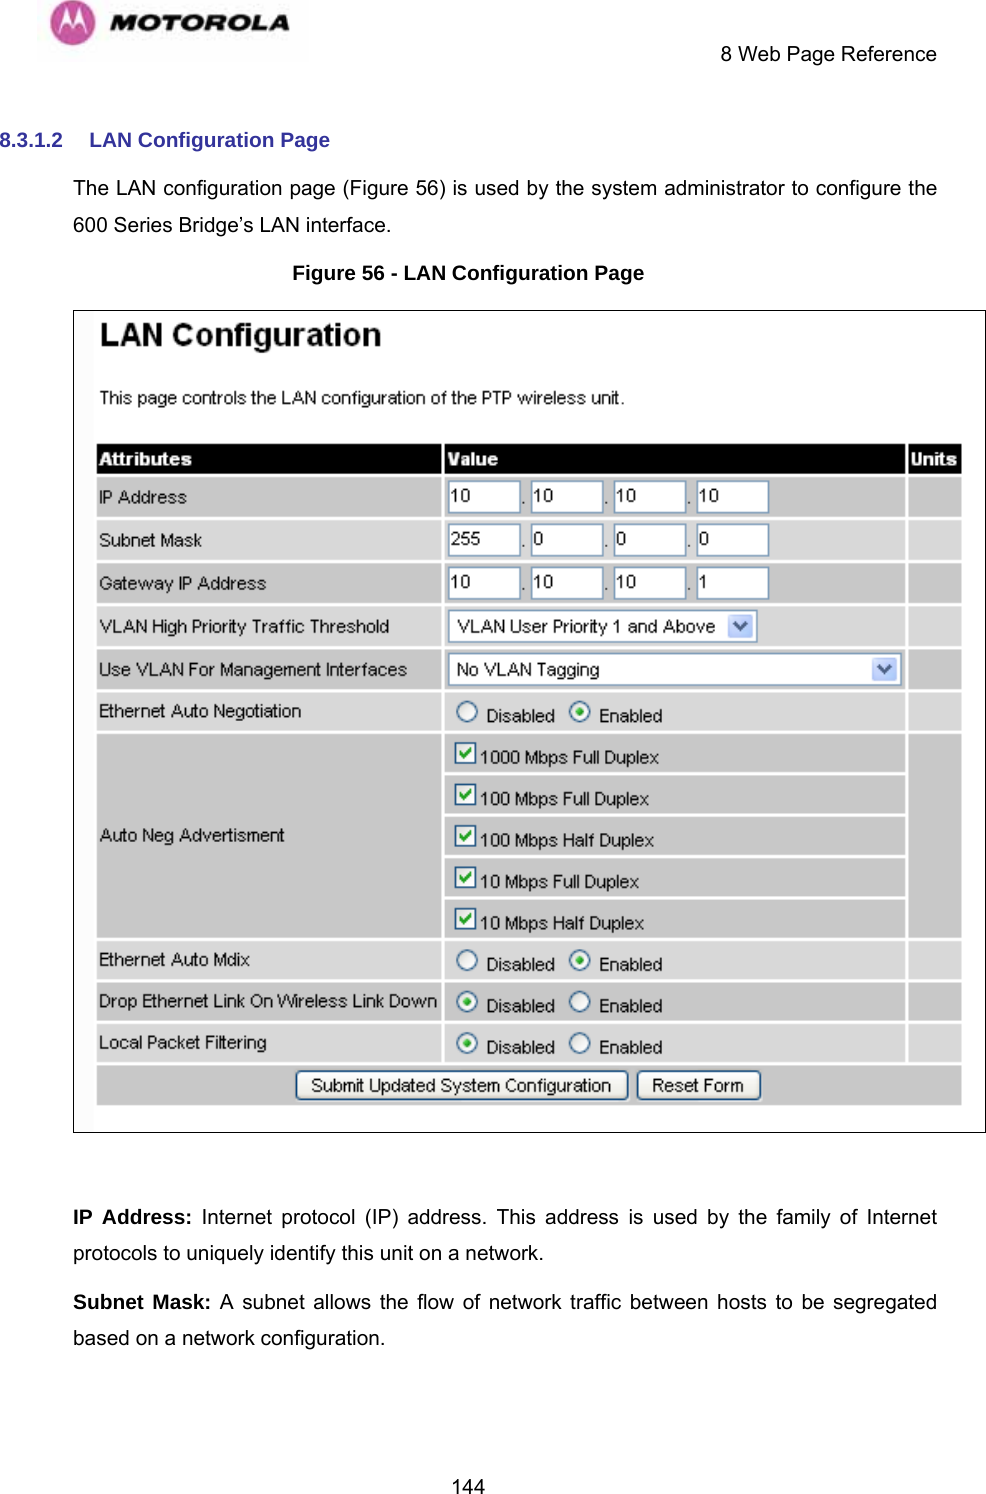     8 Web Page Reference  1448.3.1.2  LAN Configuration Page The LAN configuration page (Figure 56) is used by the system administrator to configure the 600 Series Bridge’s LAN interface. Figure 56 - LAN Configuration Page   IP Address: Internet protocol (IP) address. This address is used by the family of Internet protocols to uniquely identify this unit on a network.  Subnet Mask: A subnet allows the flow of network traffic between hosts to be segregated based on a network configuration.  